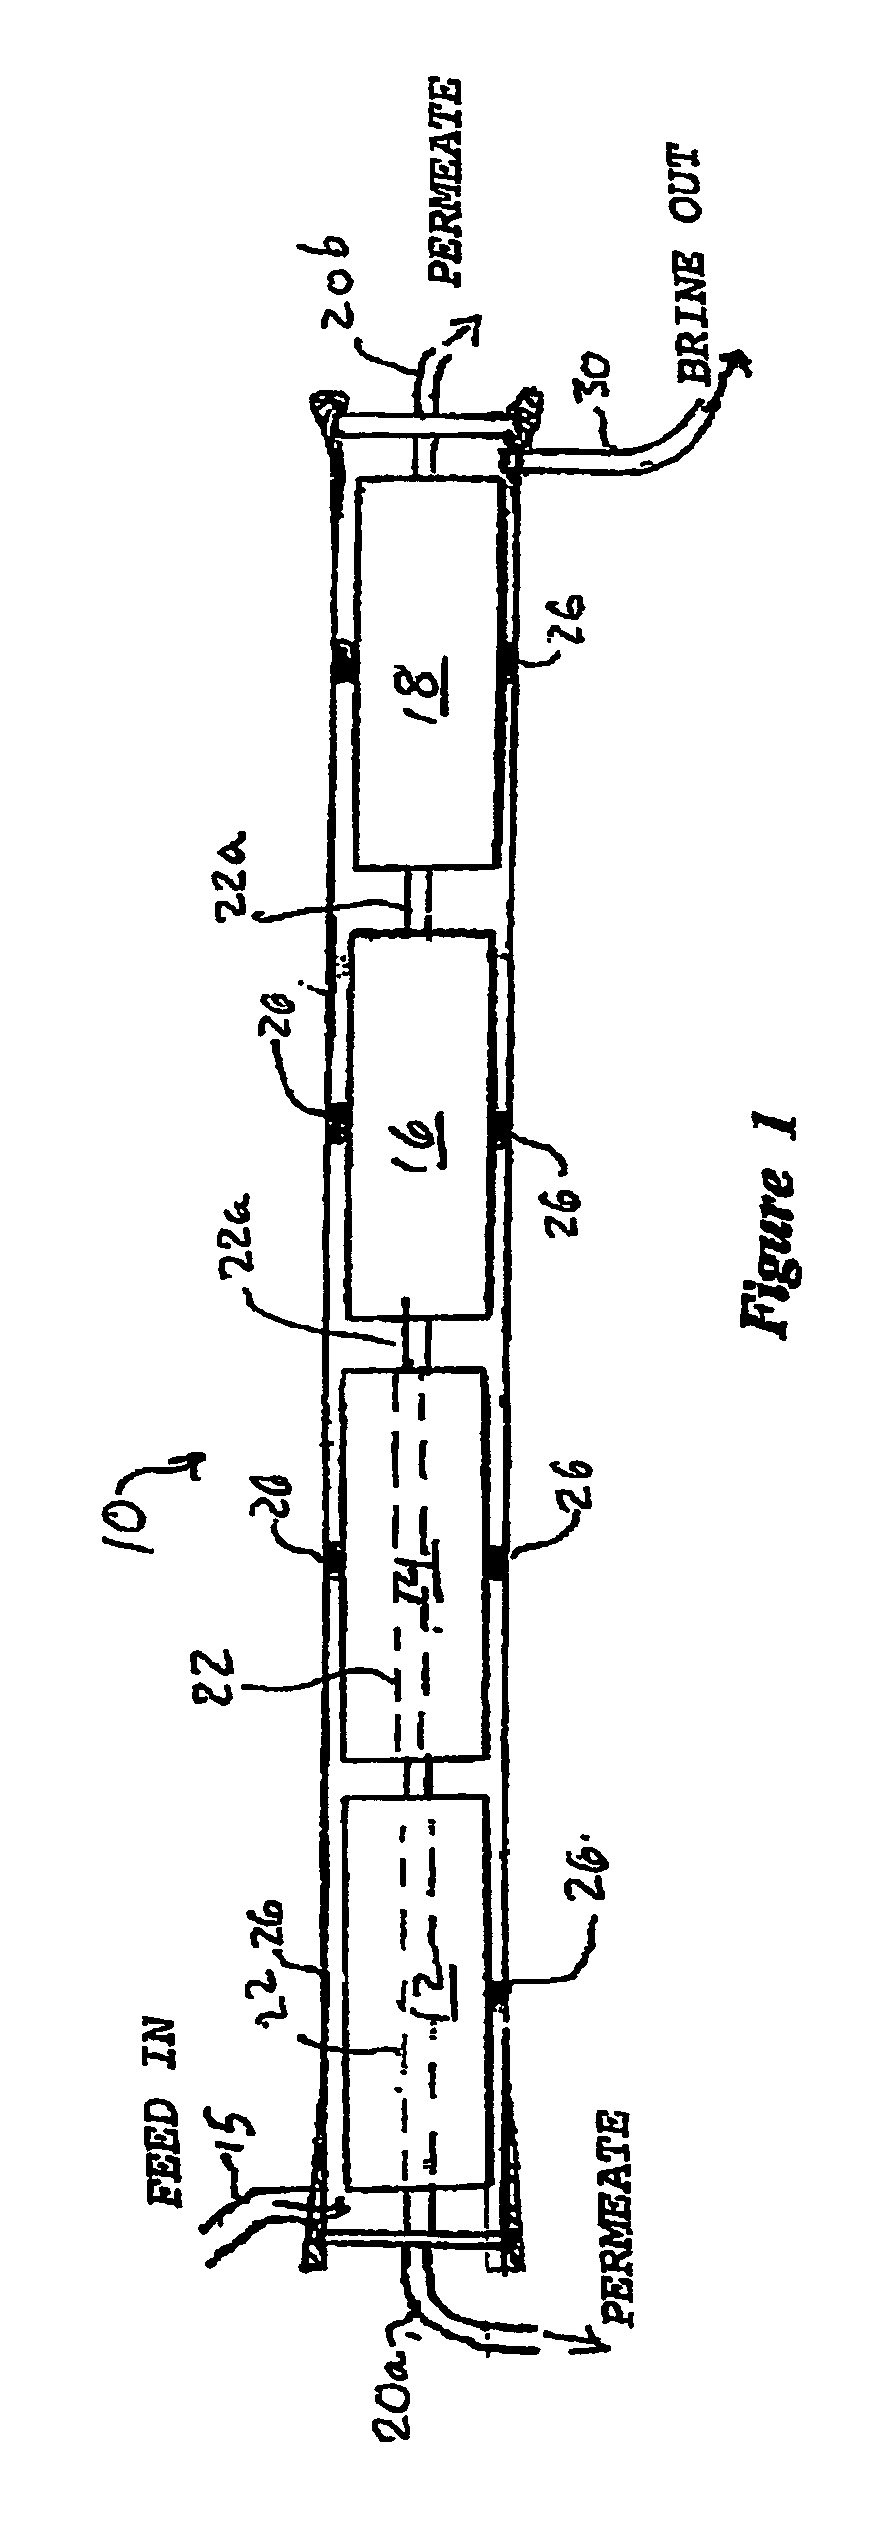 Branched flow filtration and system